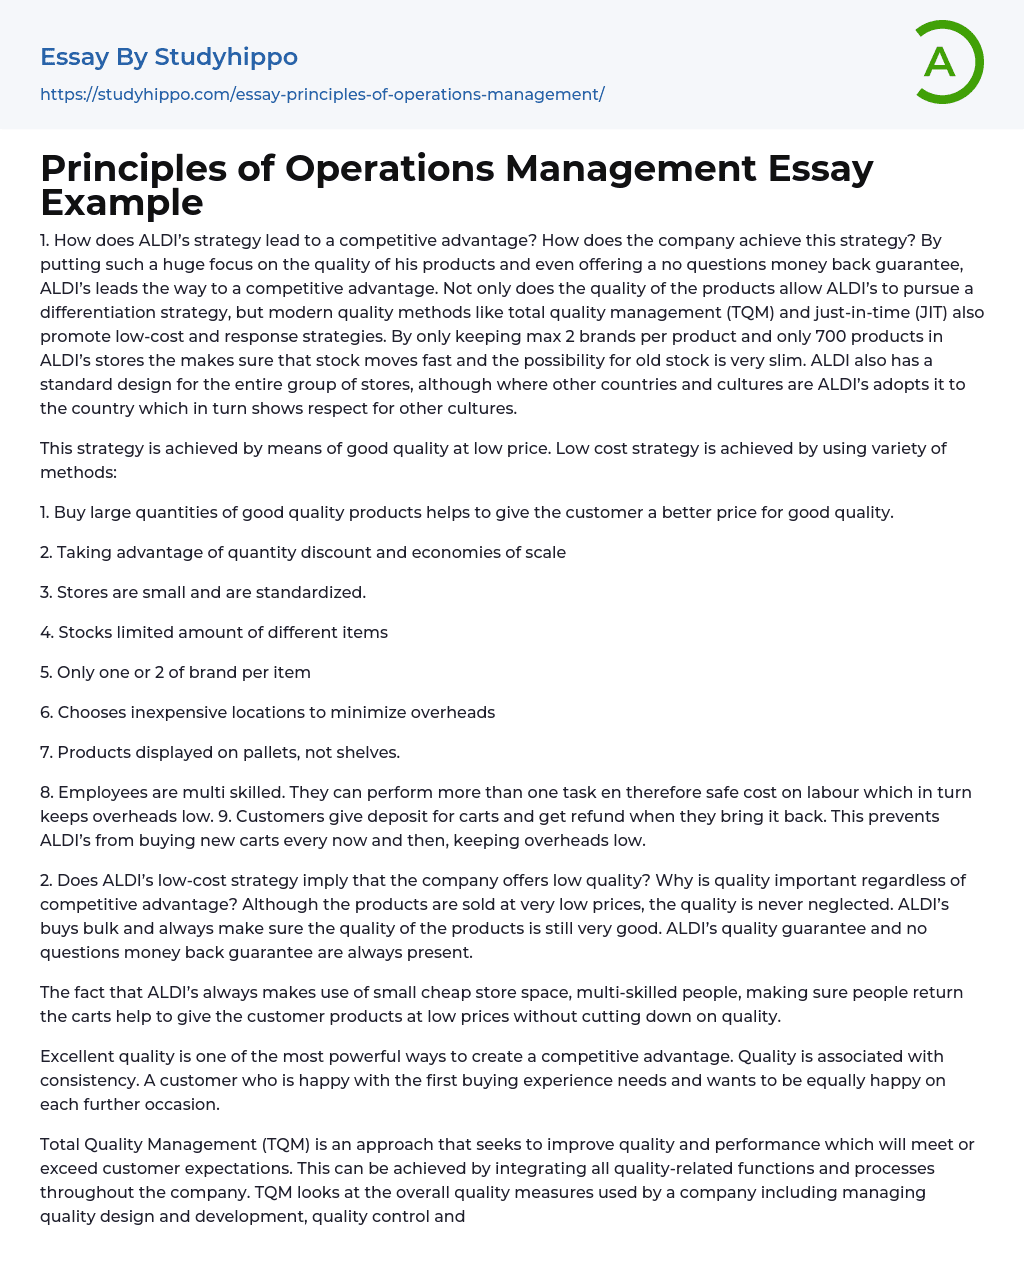 essay questions about operations management